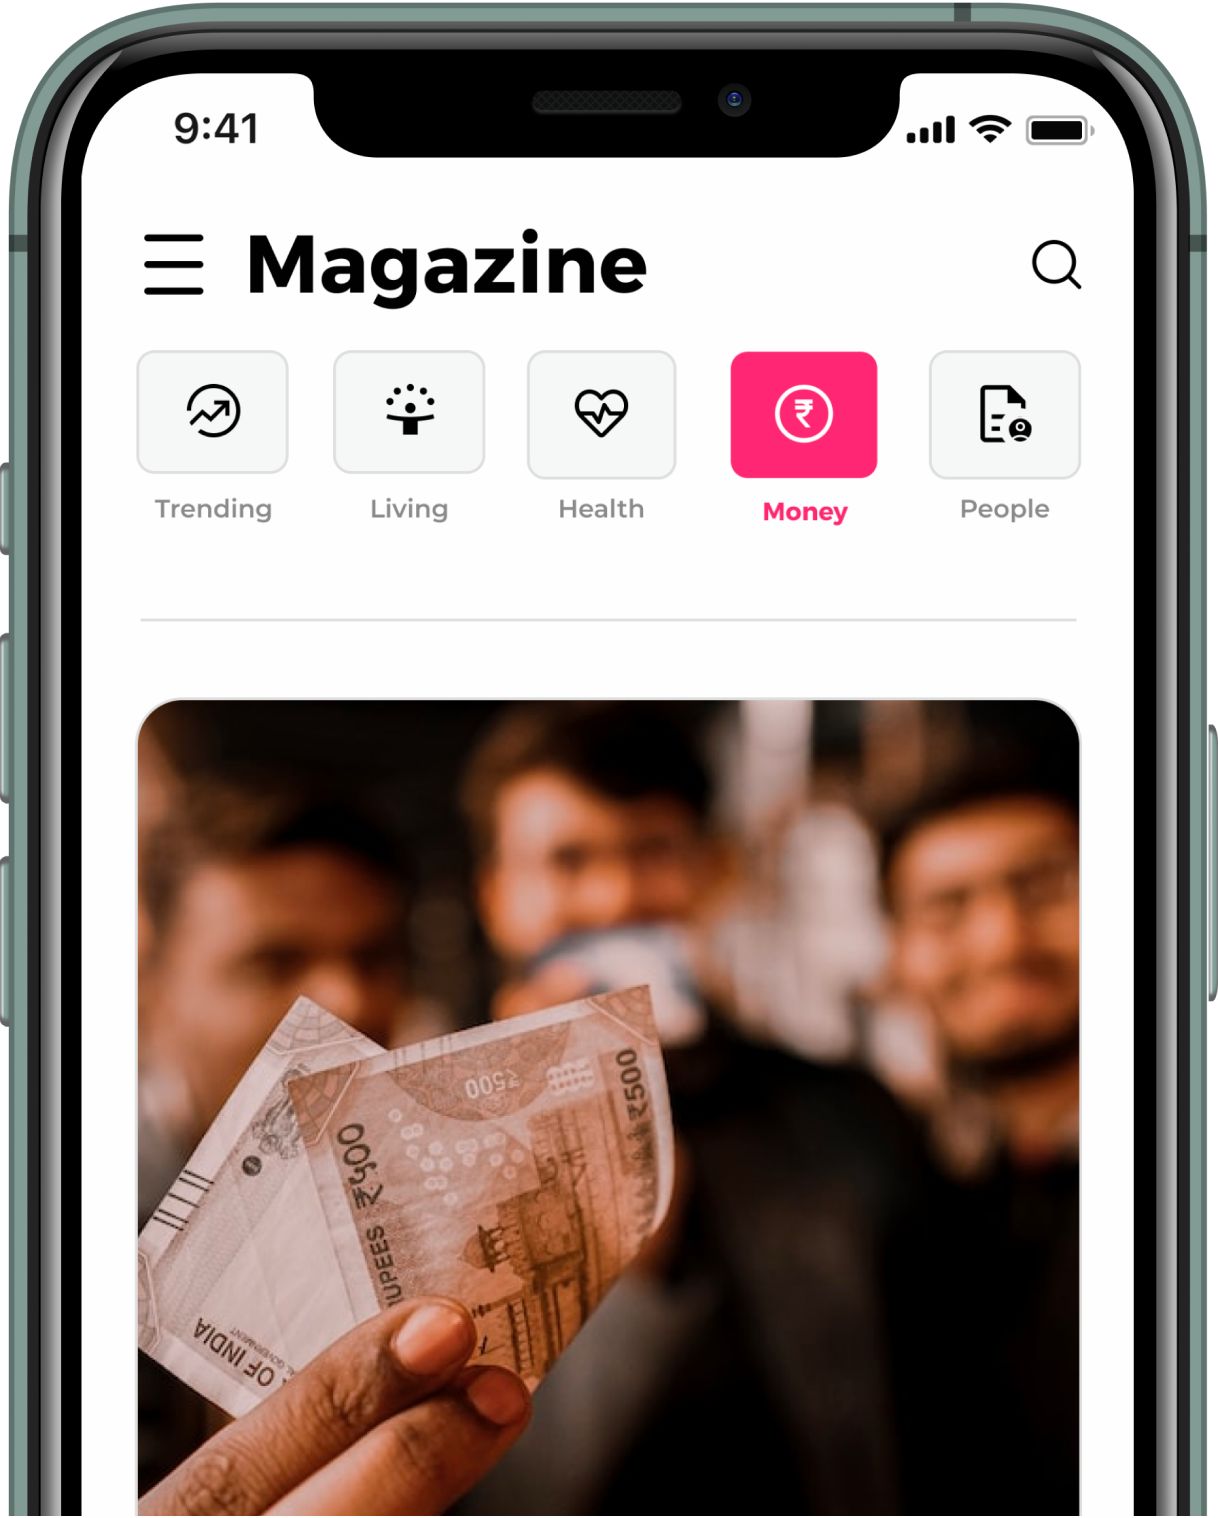 Magazine on Money Section in Silver Talkies App